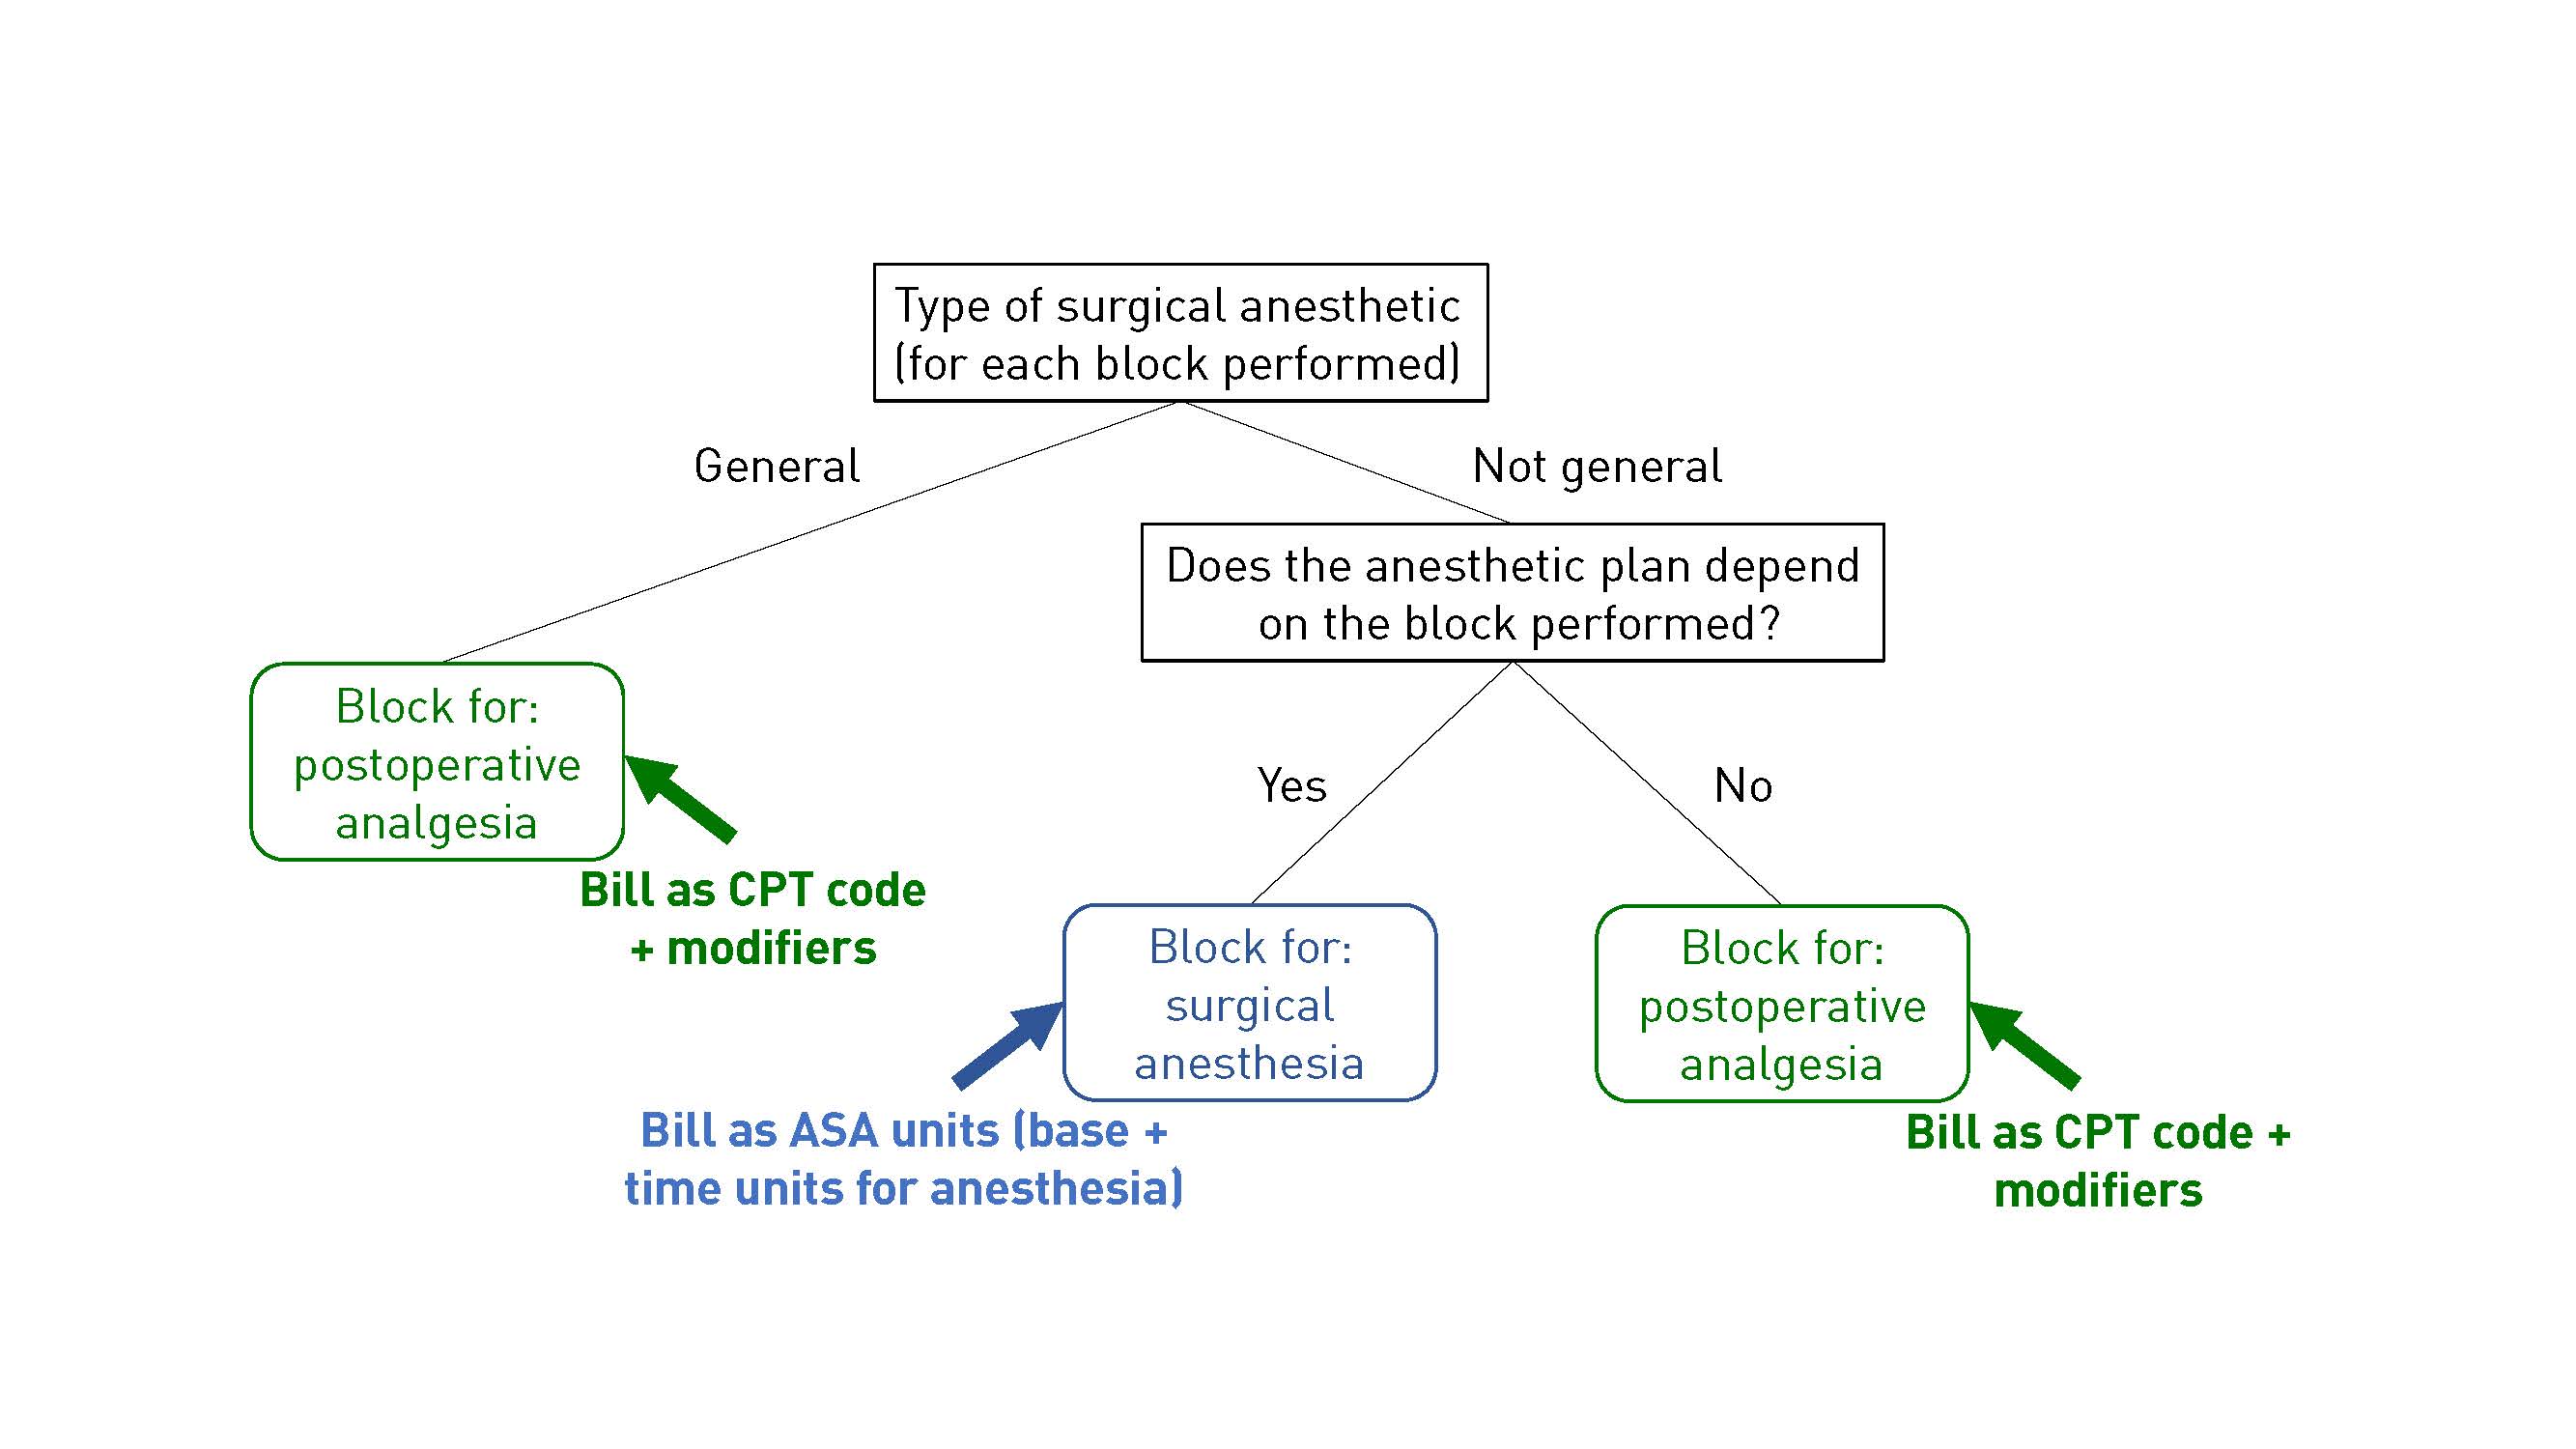 Timing considerations for billing